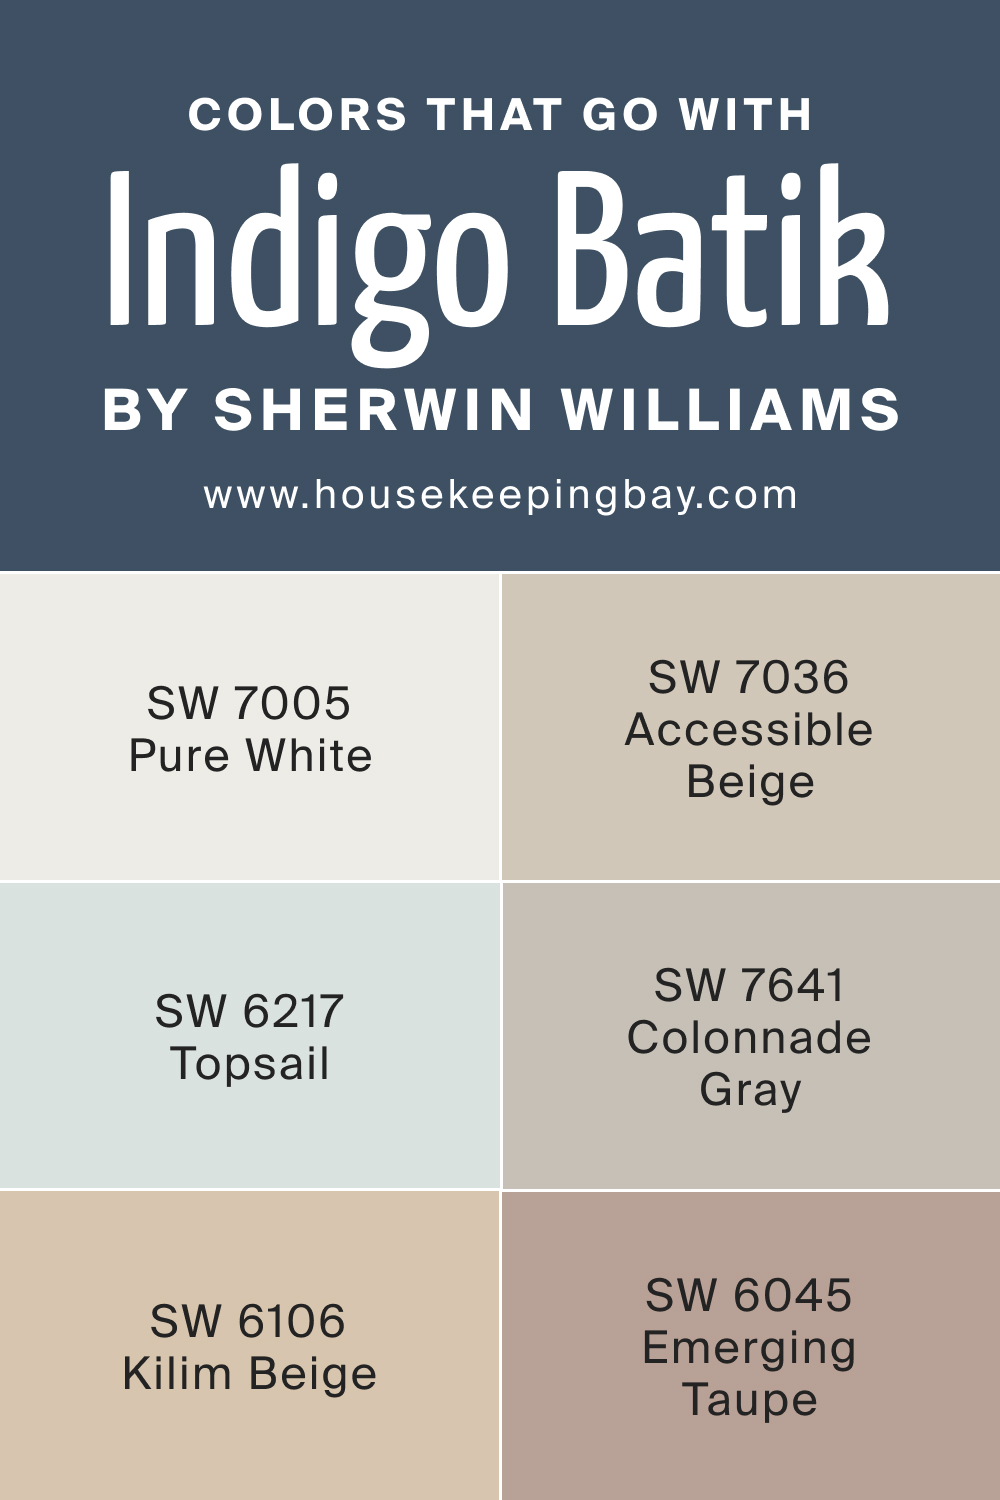 Colors that goes with SW 7602 Indigo Batik by Sherwin Williams